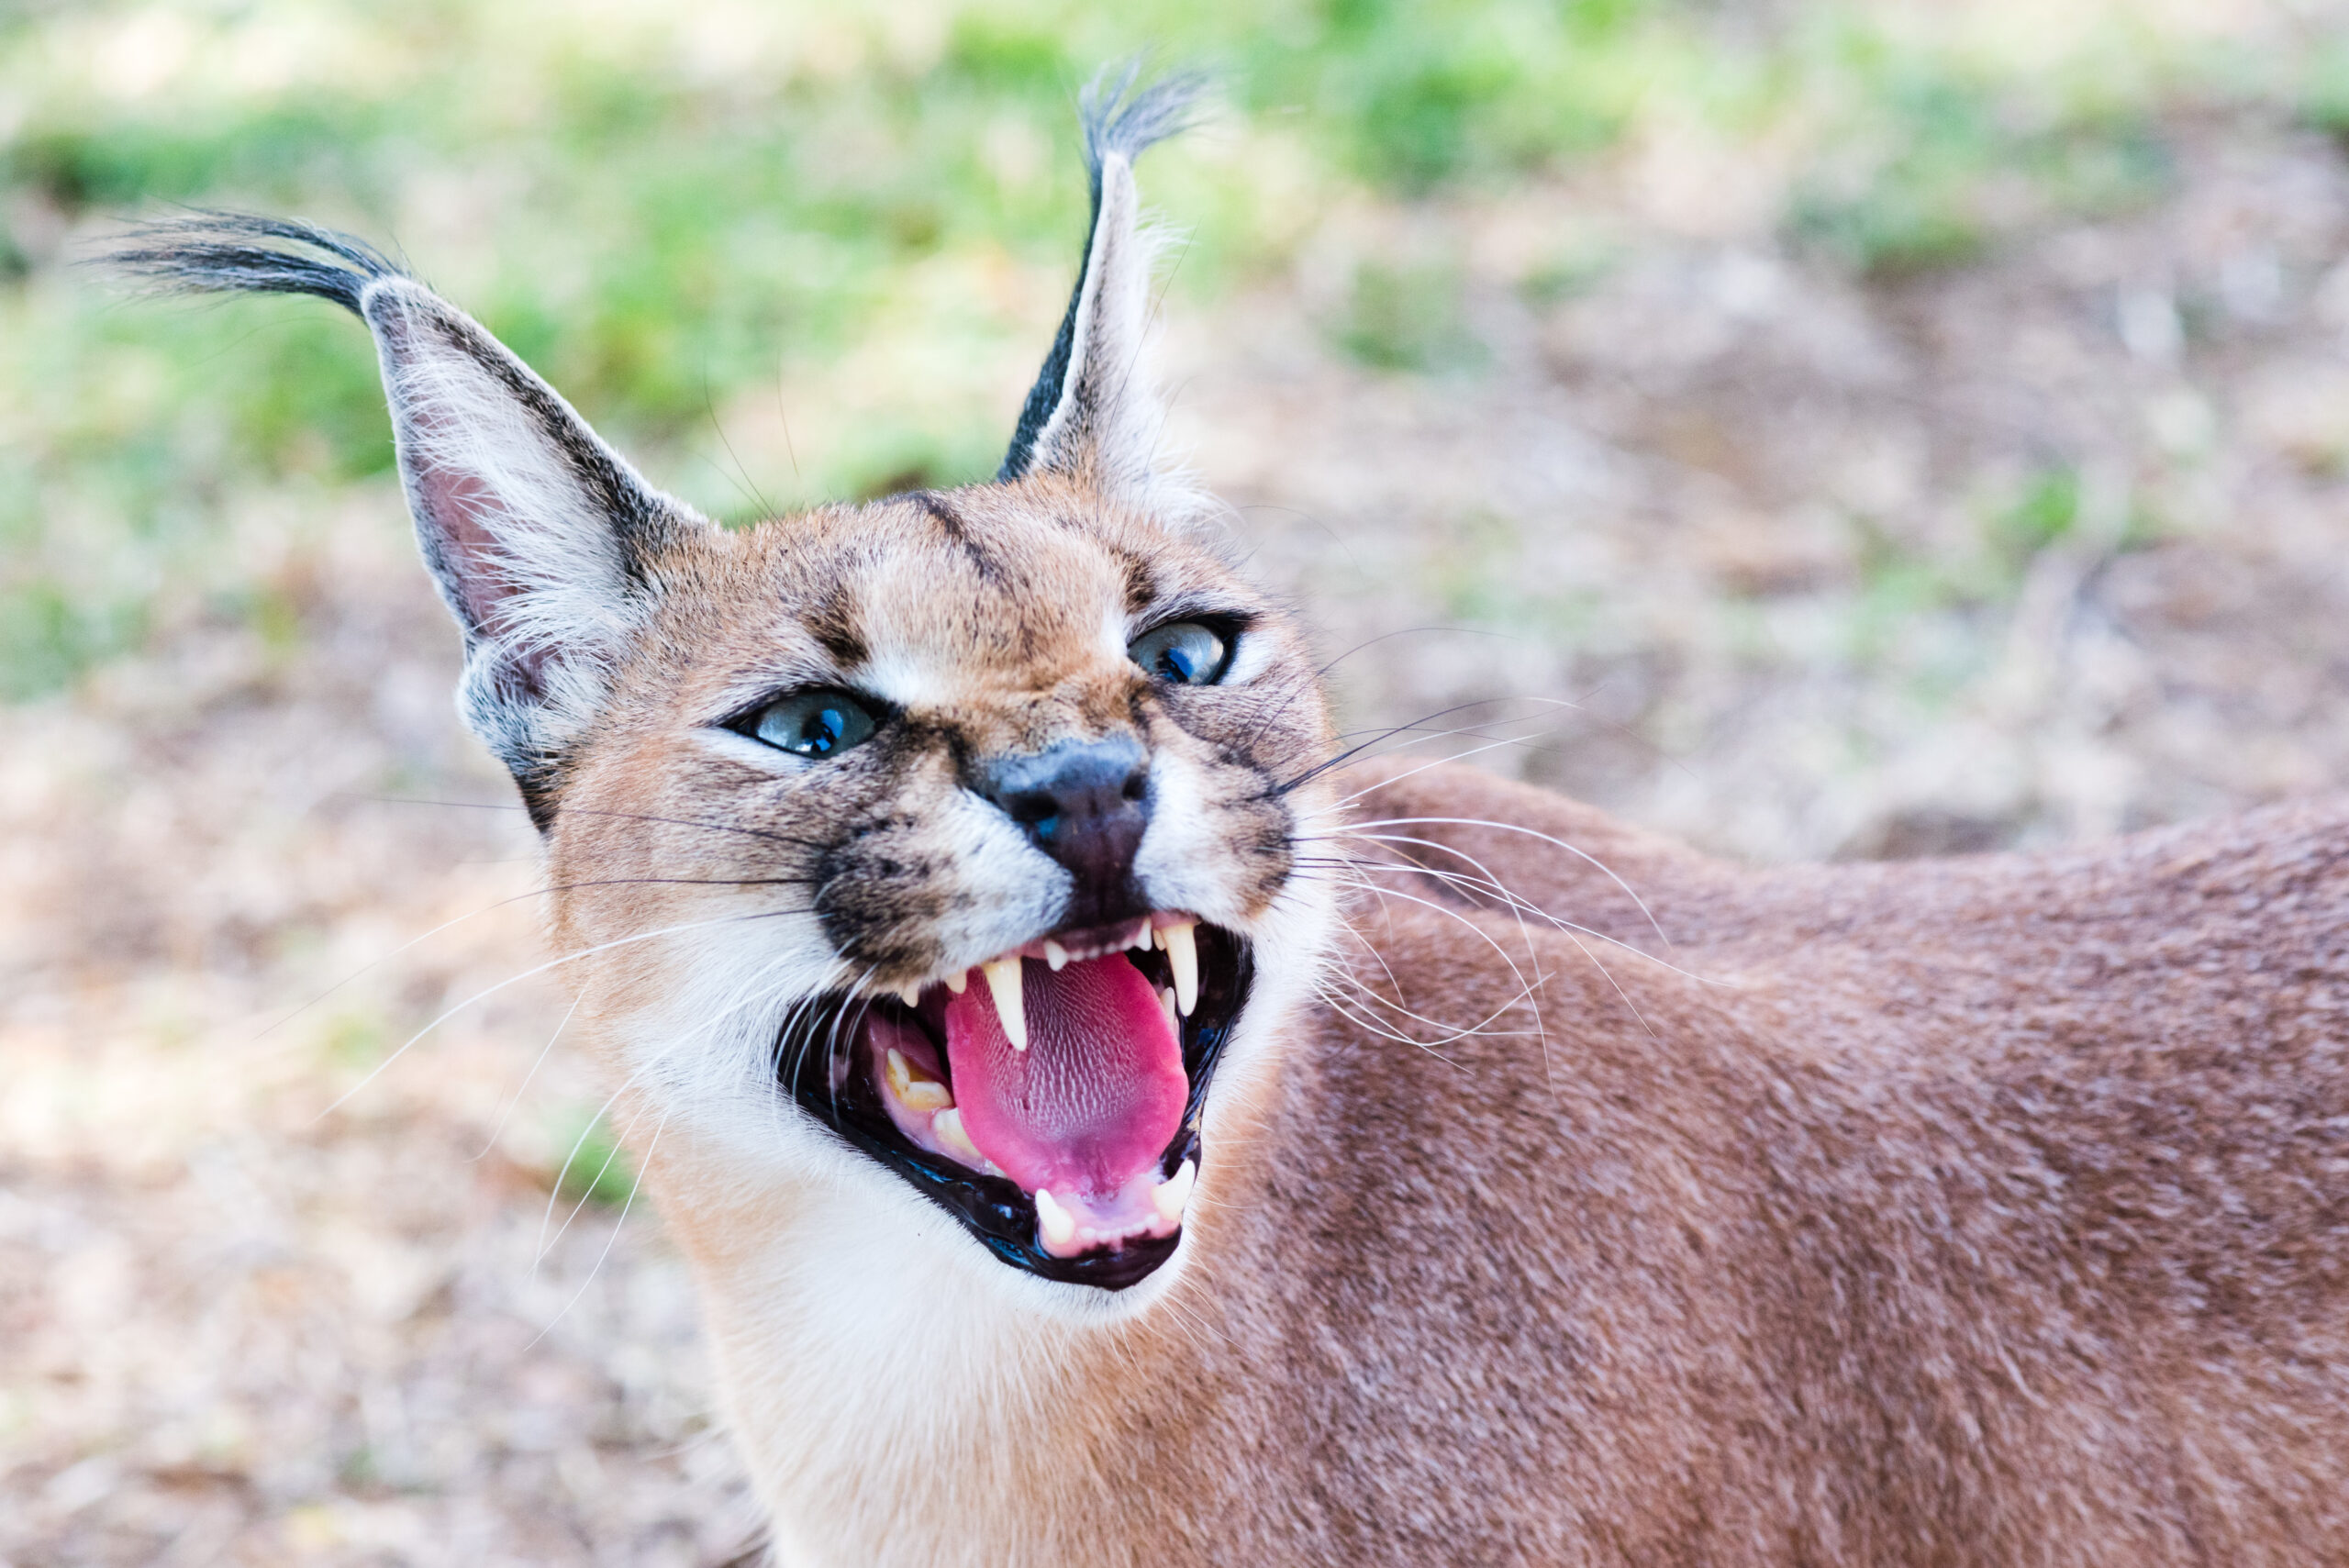 10 Fascinating Facts About the Caracal, Where To Go In The Northern Circuit, 10 Mind-Blowing Facts about the African Continent, Best All-inclusive African Safari Vacations, Ten Surprising Activities You Can Try on an African Safari, What to Expect on Your Serengeti Safari